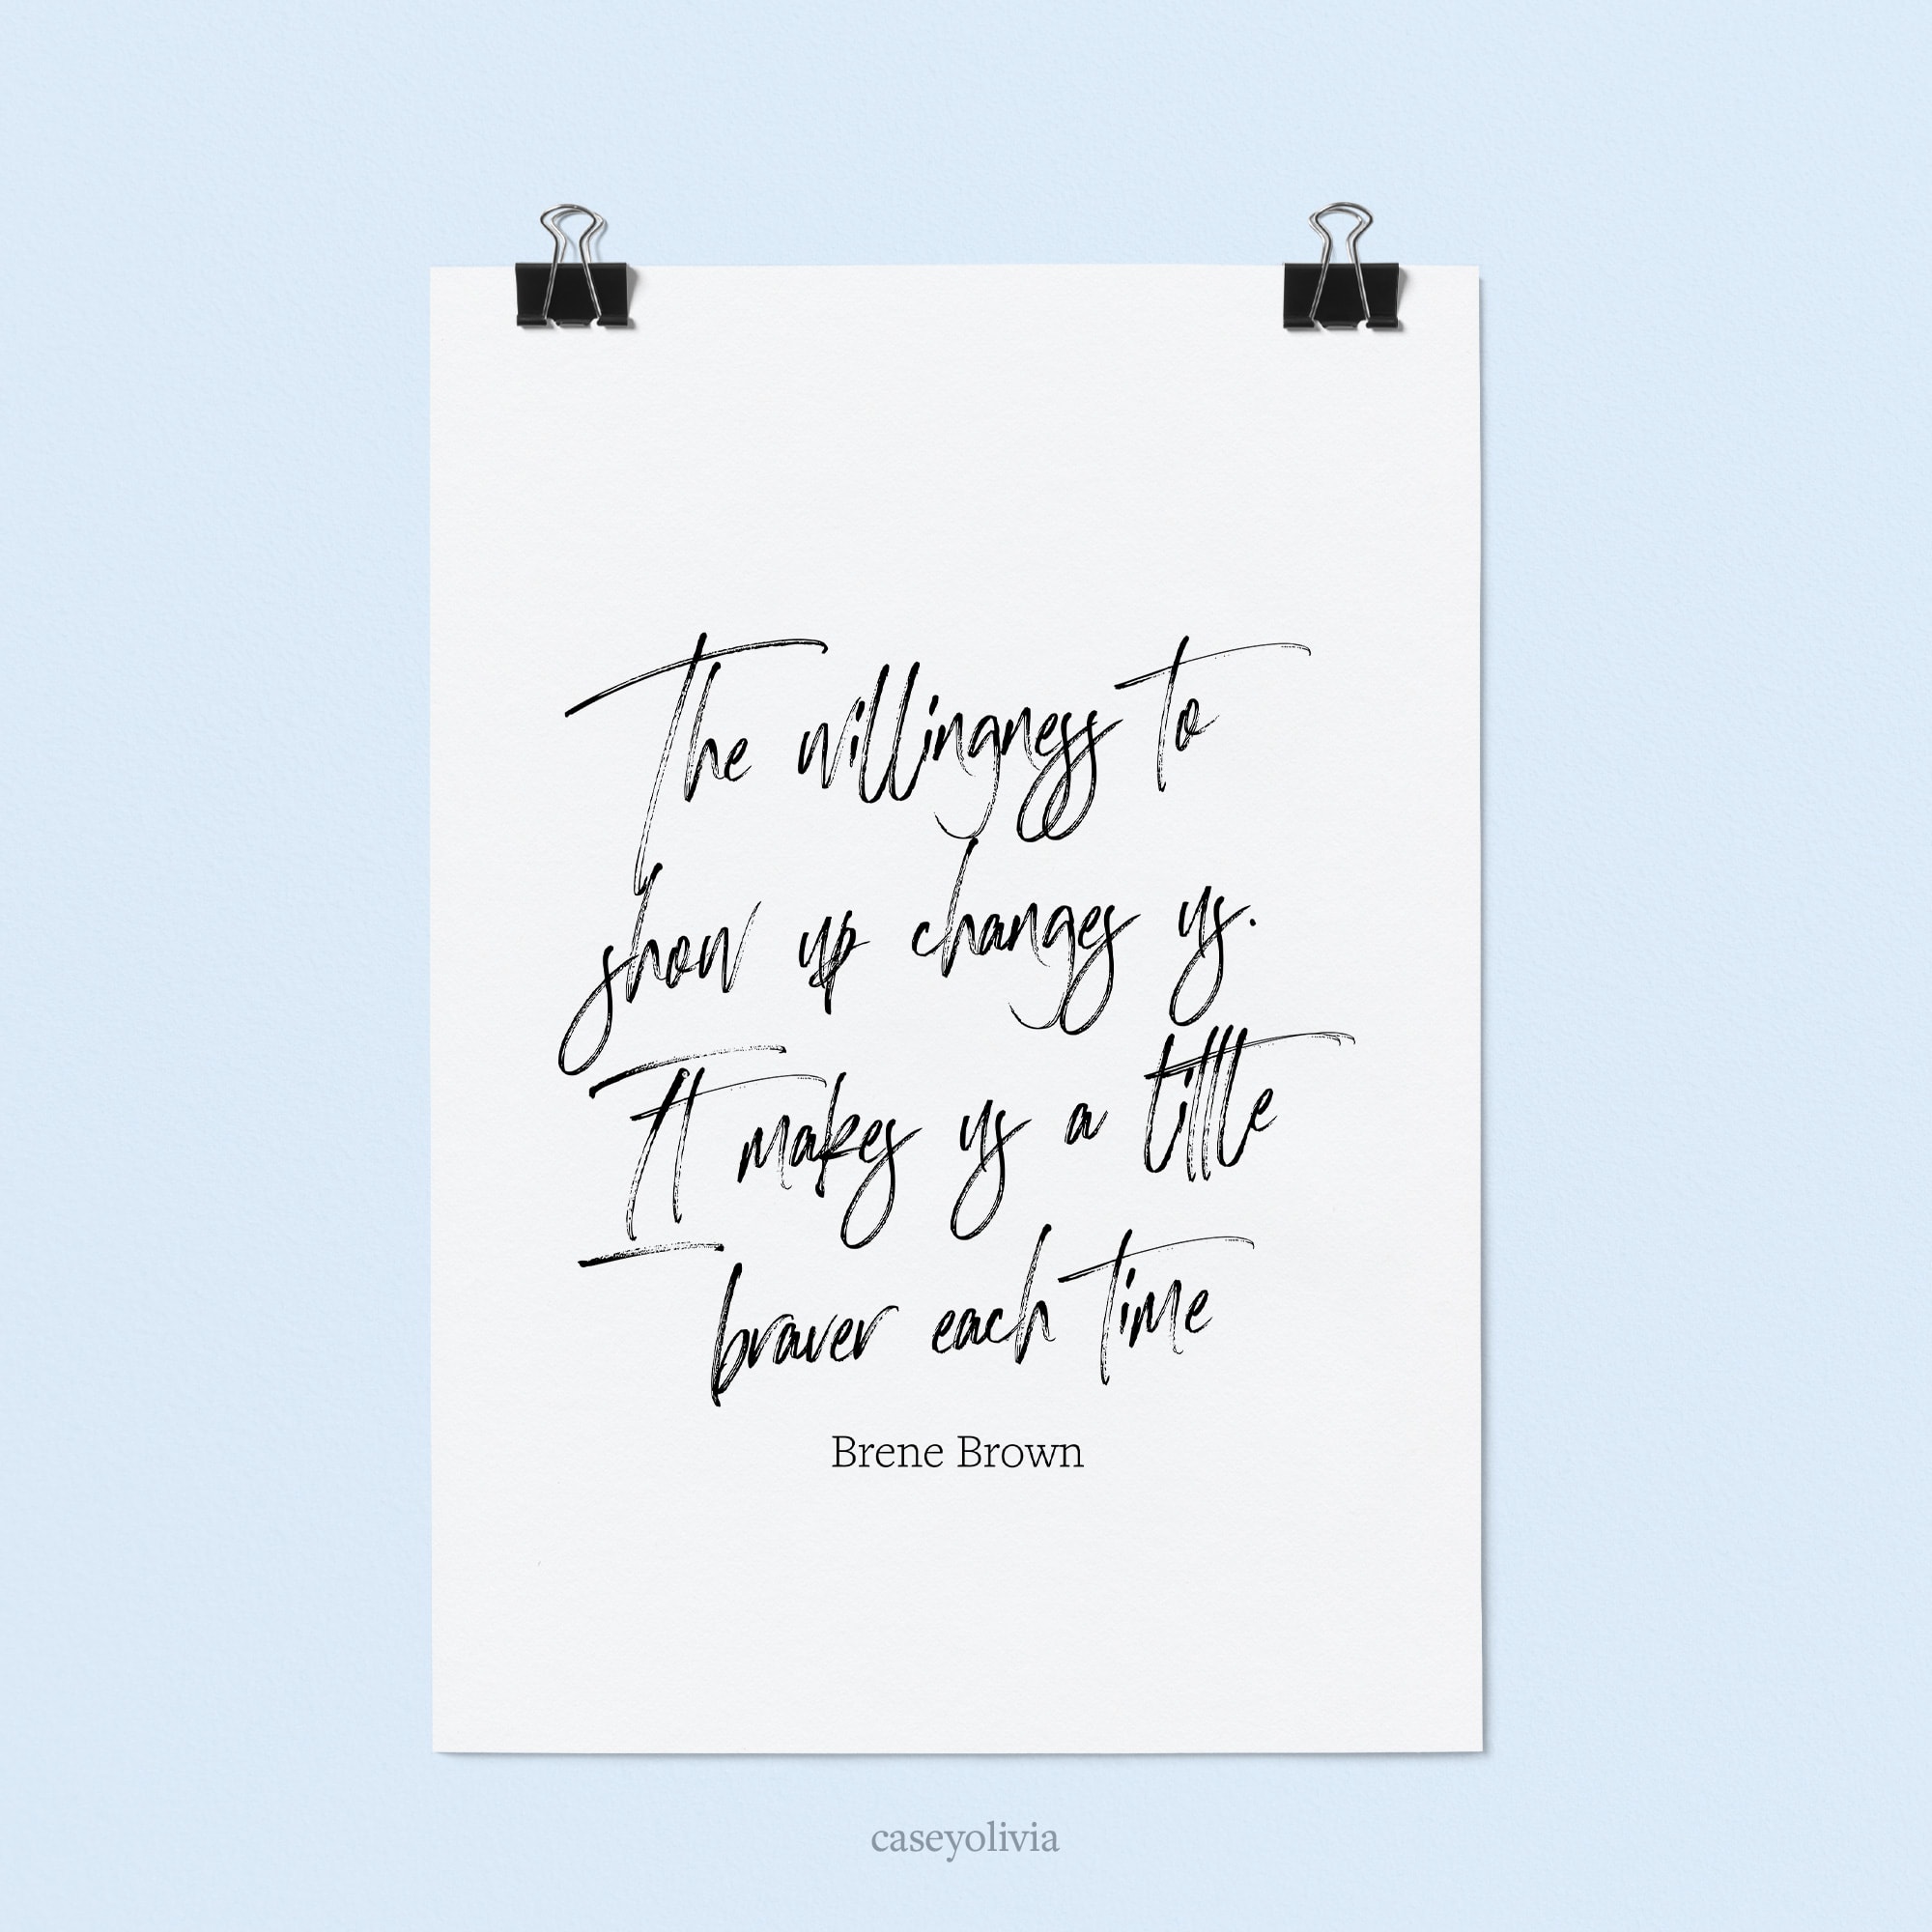 show up everyday quote to print from brene brown